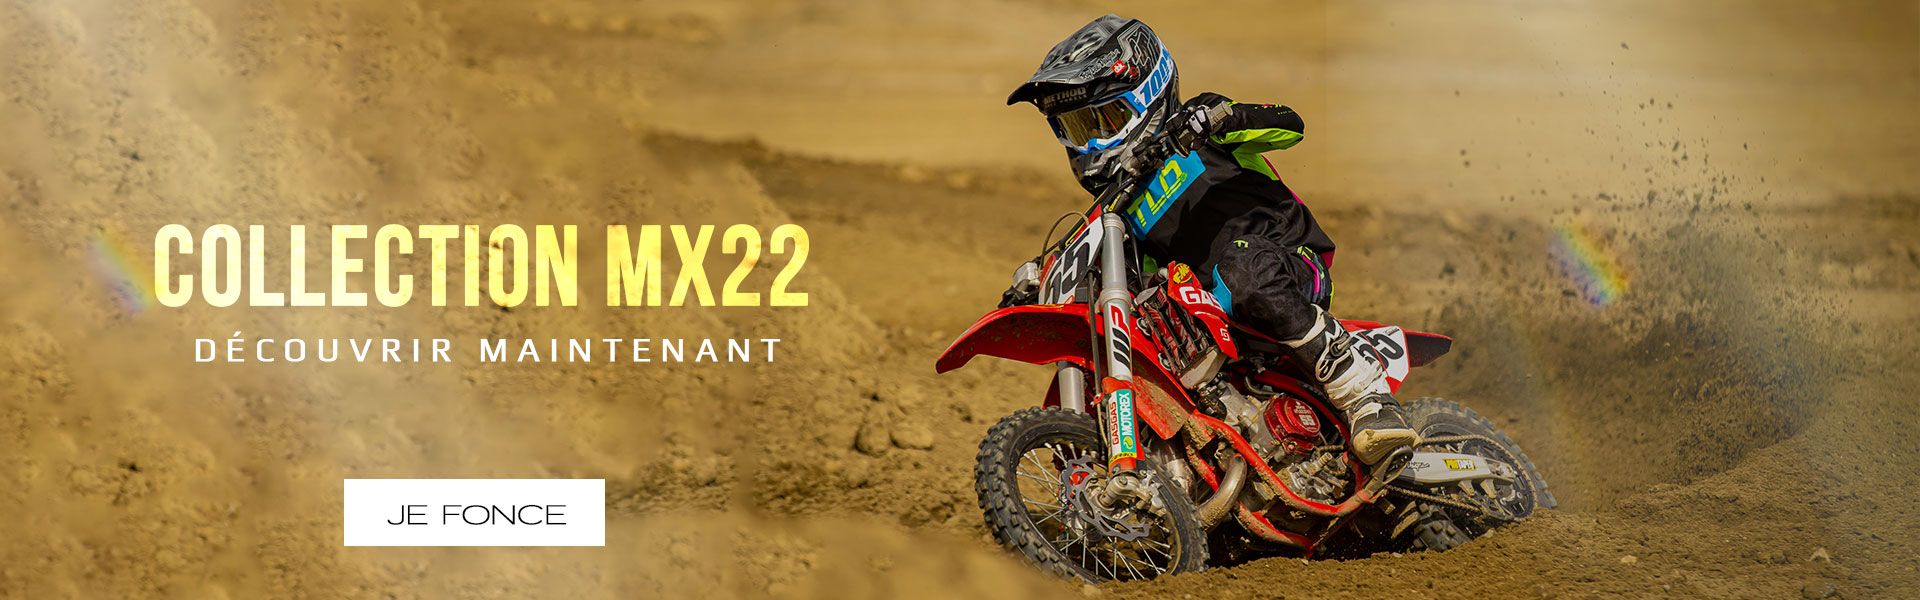 COLLECTION MX22